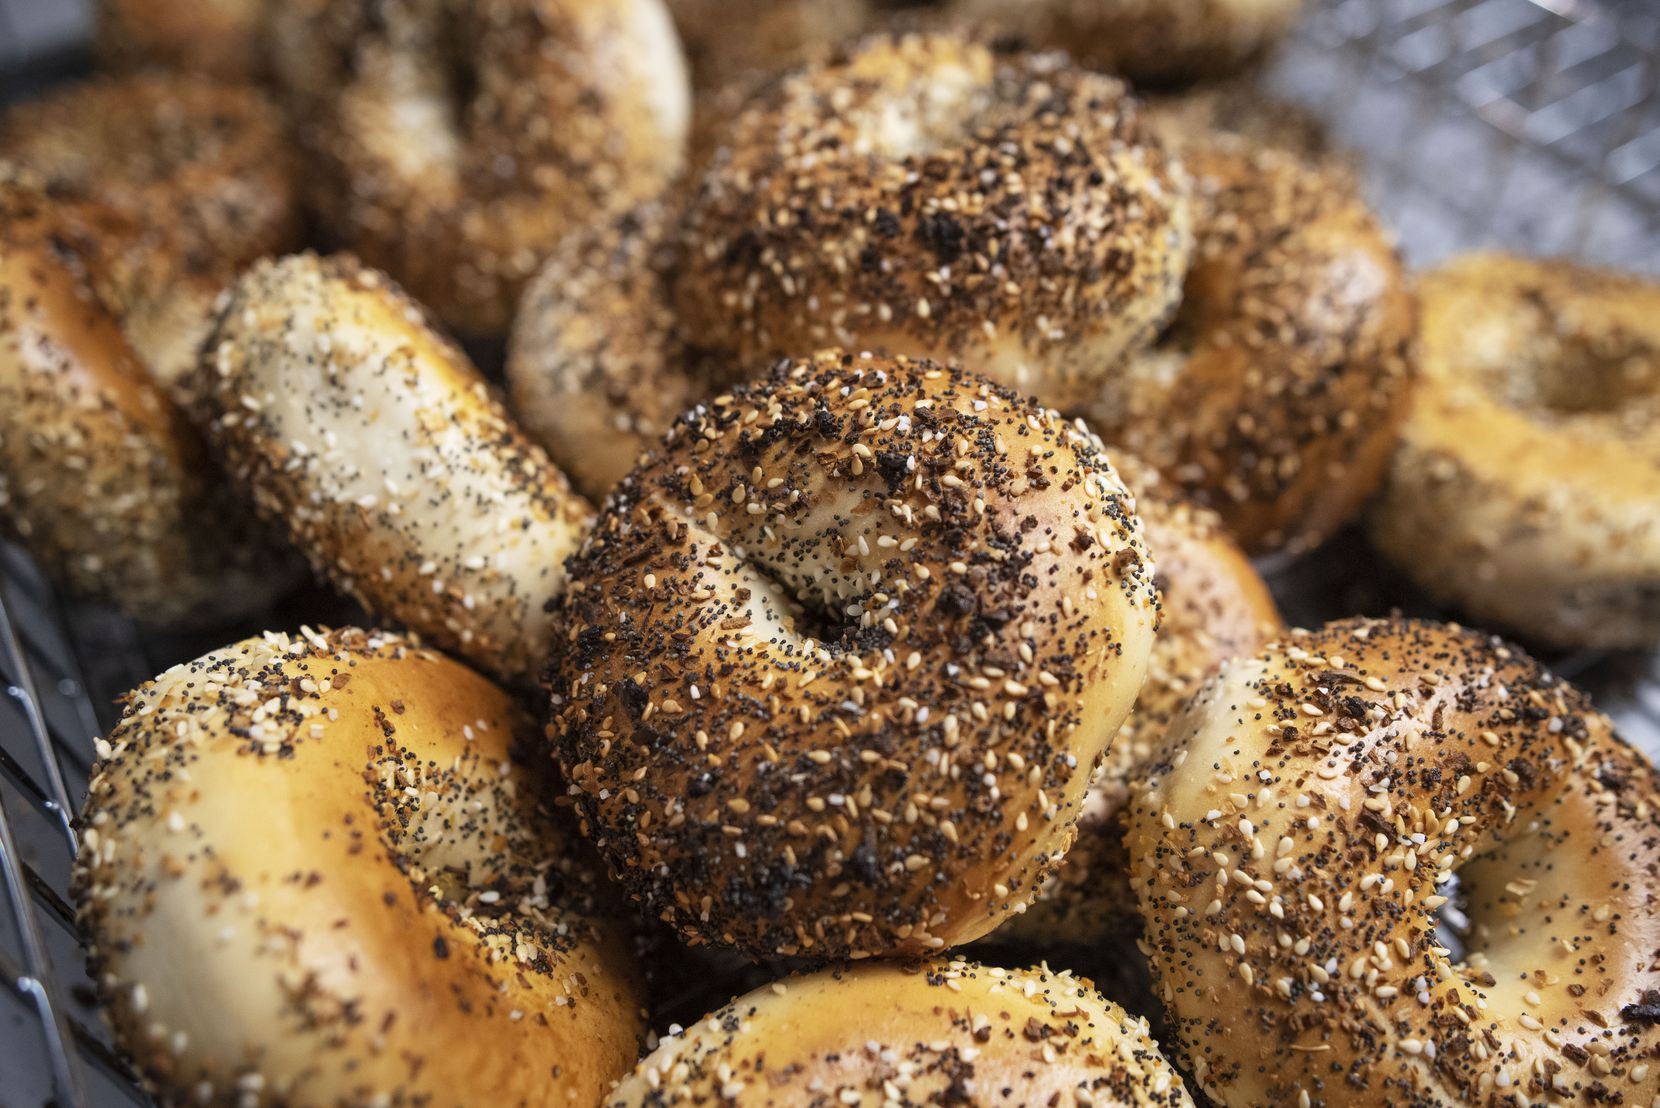 The owner of Shug's Bagels wants to open their shop near SMU in Dallas. But on-again, off-again power is a problem.